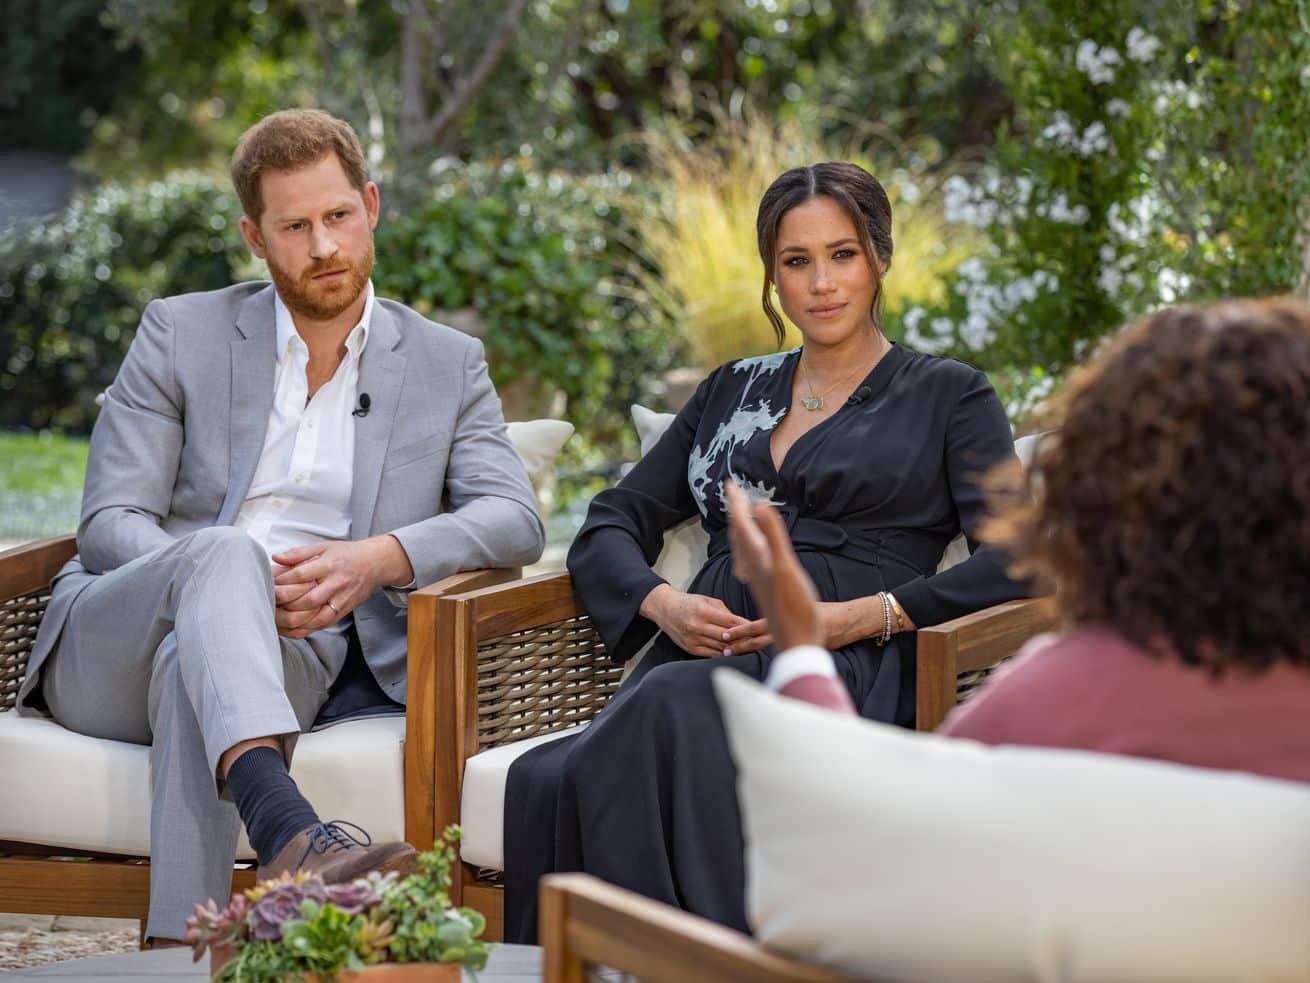 Meghan Markle says the royal family was “concerned” about her future child’s skin color